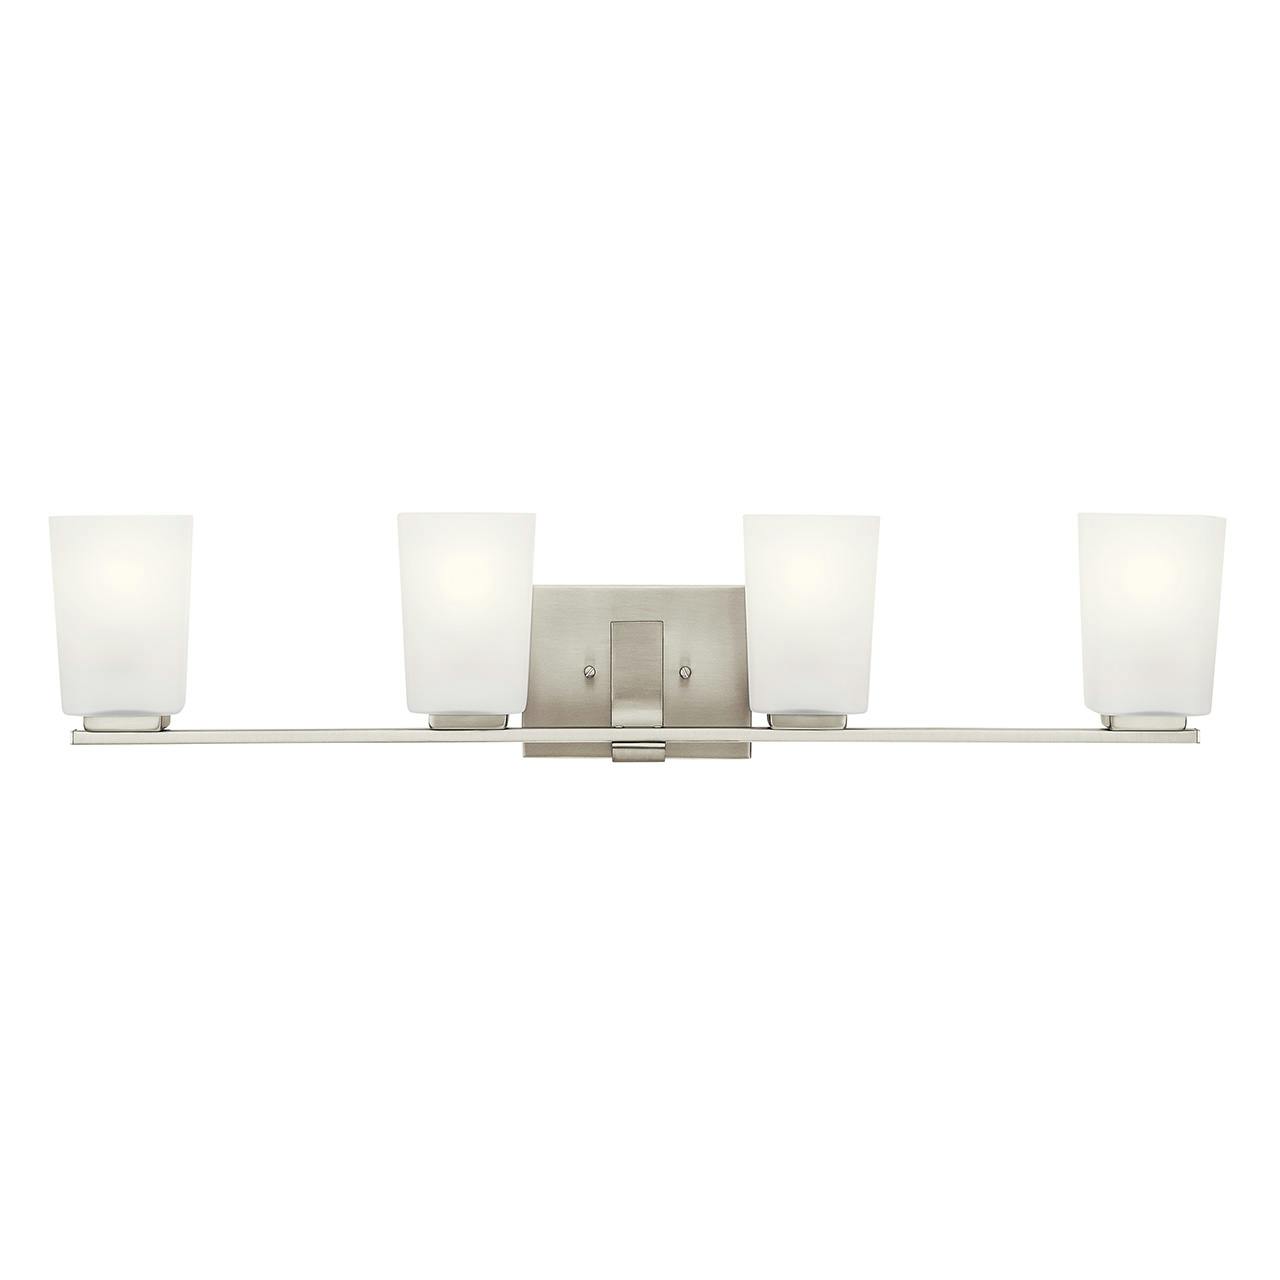 The Roehm 4 Light Vanity Light Brushed Nickel facing up on a white background